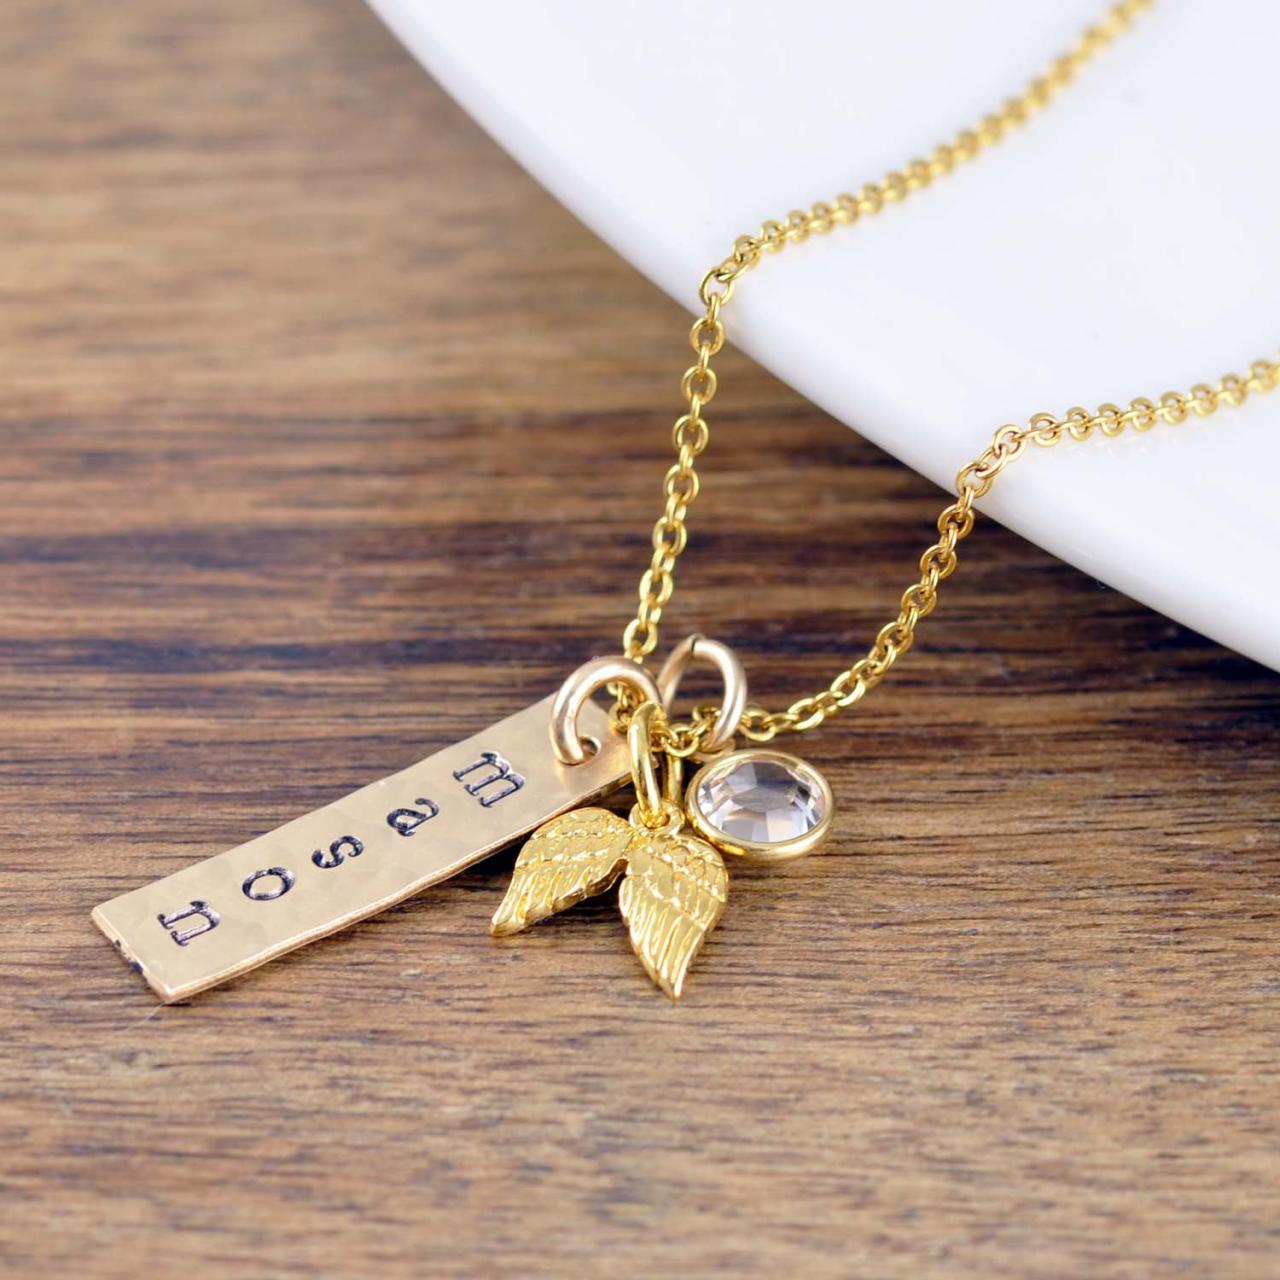 Gold Name Necklace, Baby Feet Necklace, Memorial Necklace, Memorial Jewelry, Remembrance Gifts, Baby Loss Gift, Miscarriage Remembrance